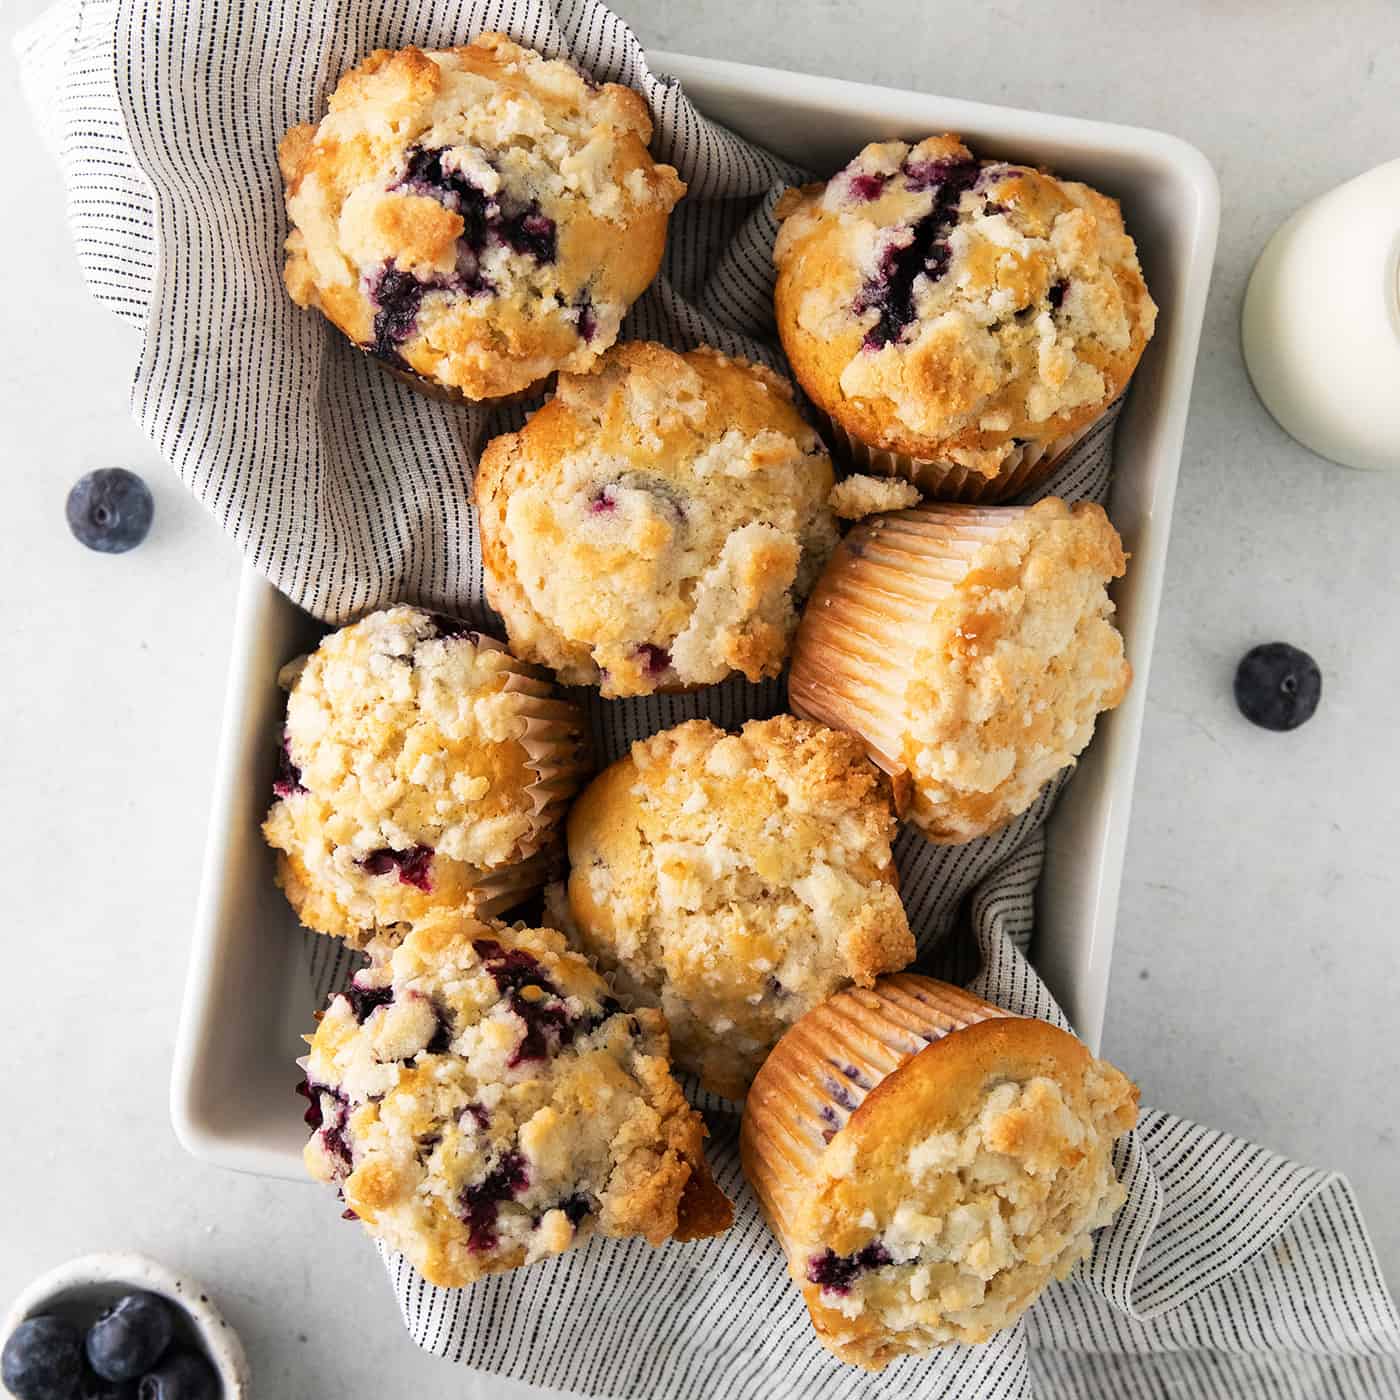 Homemade blueberry muffins in a pan